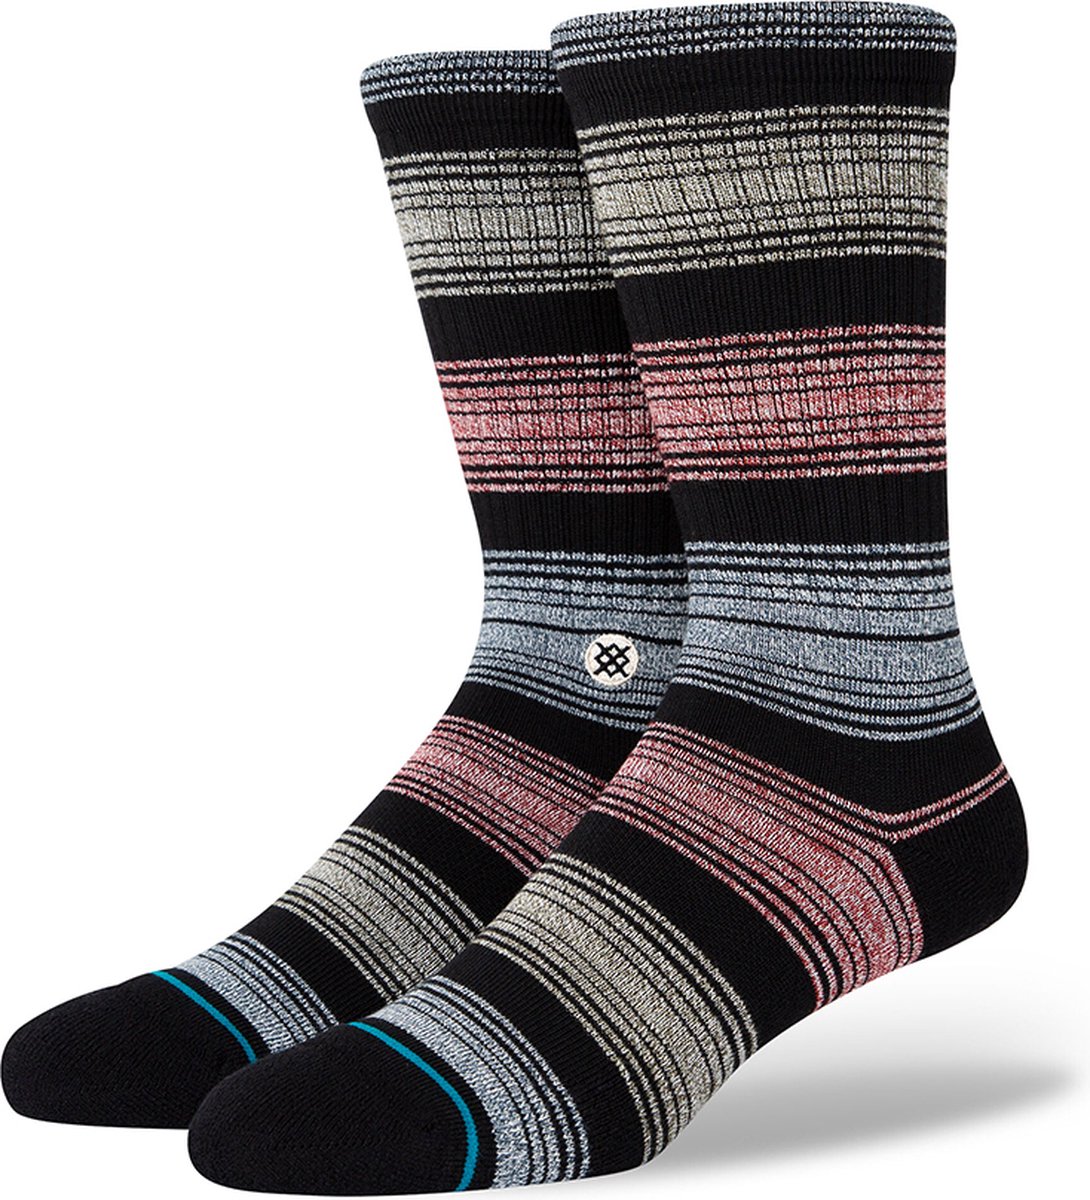 Stance casual infiknit butterblend cadent crew multi - 43-47